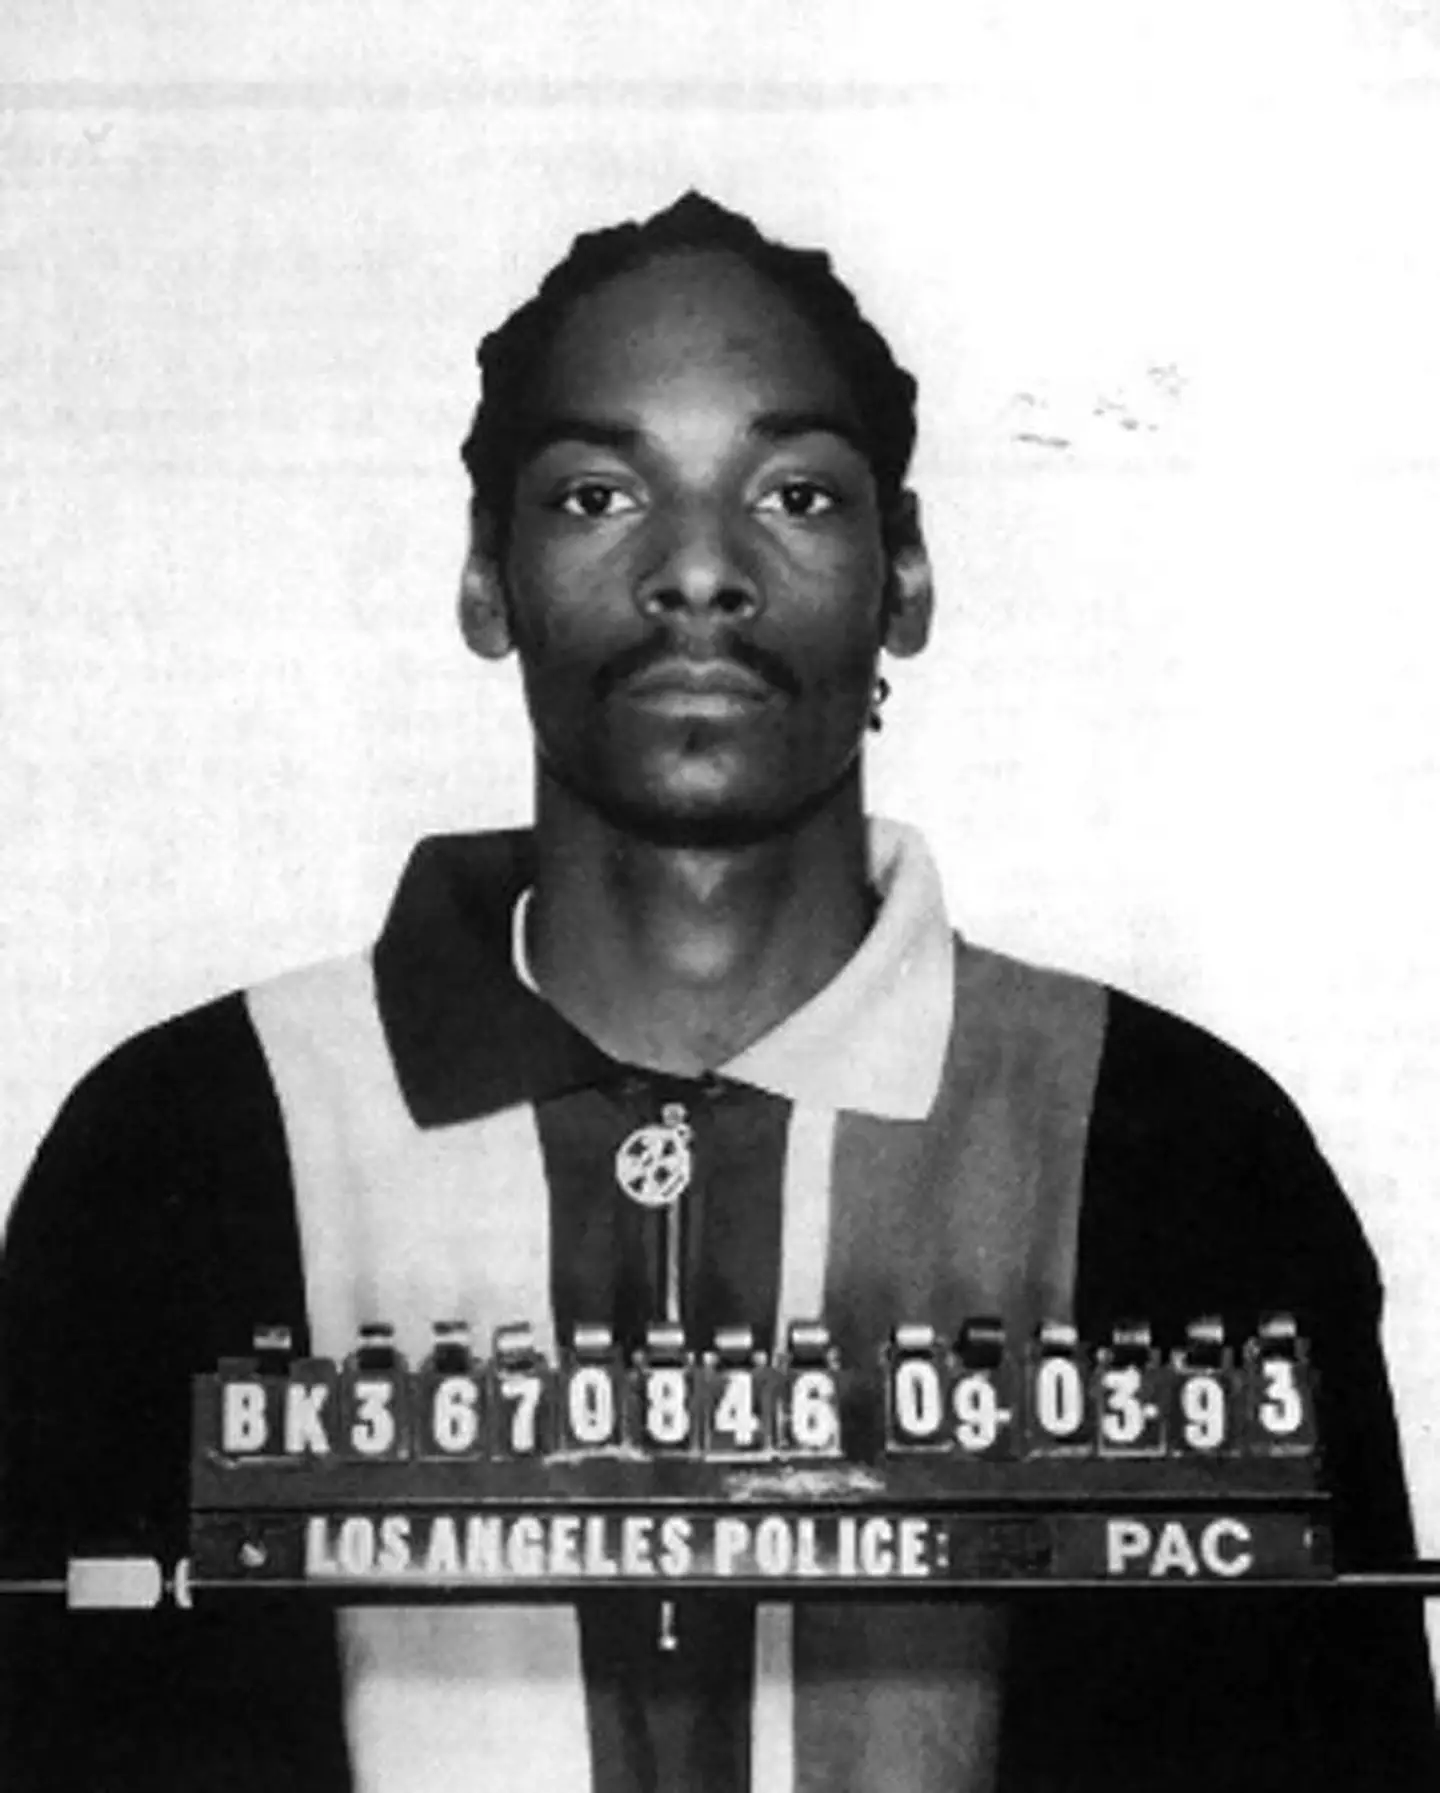 Snoop Dogg's mugshot after his 1993 murder arrest. He was later acquitted, August 1993.